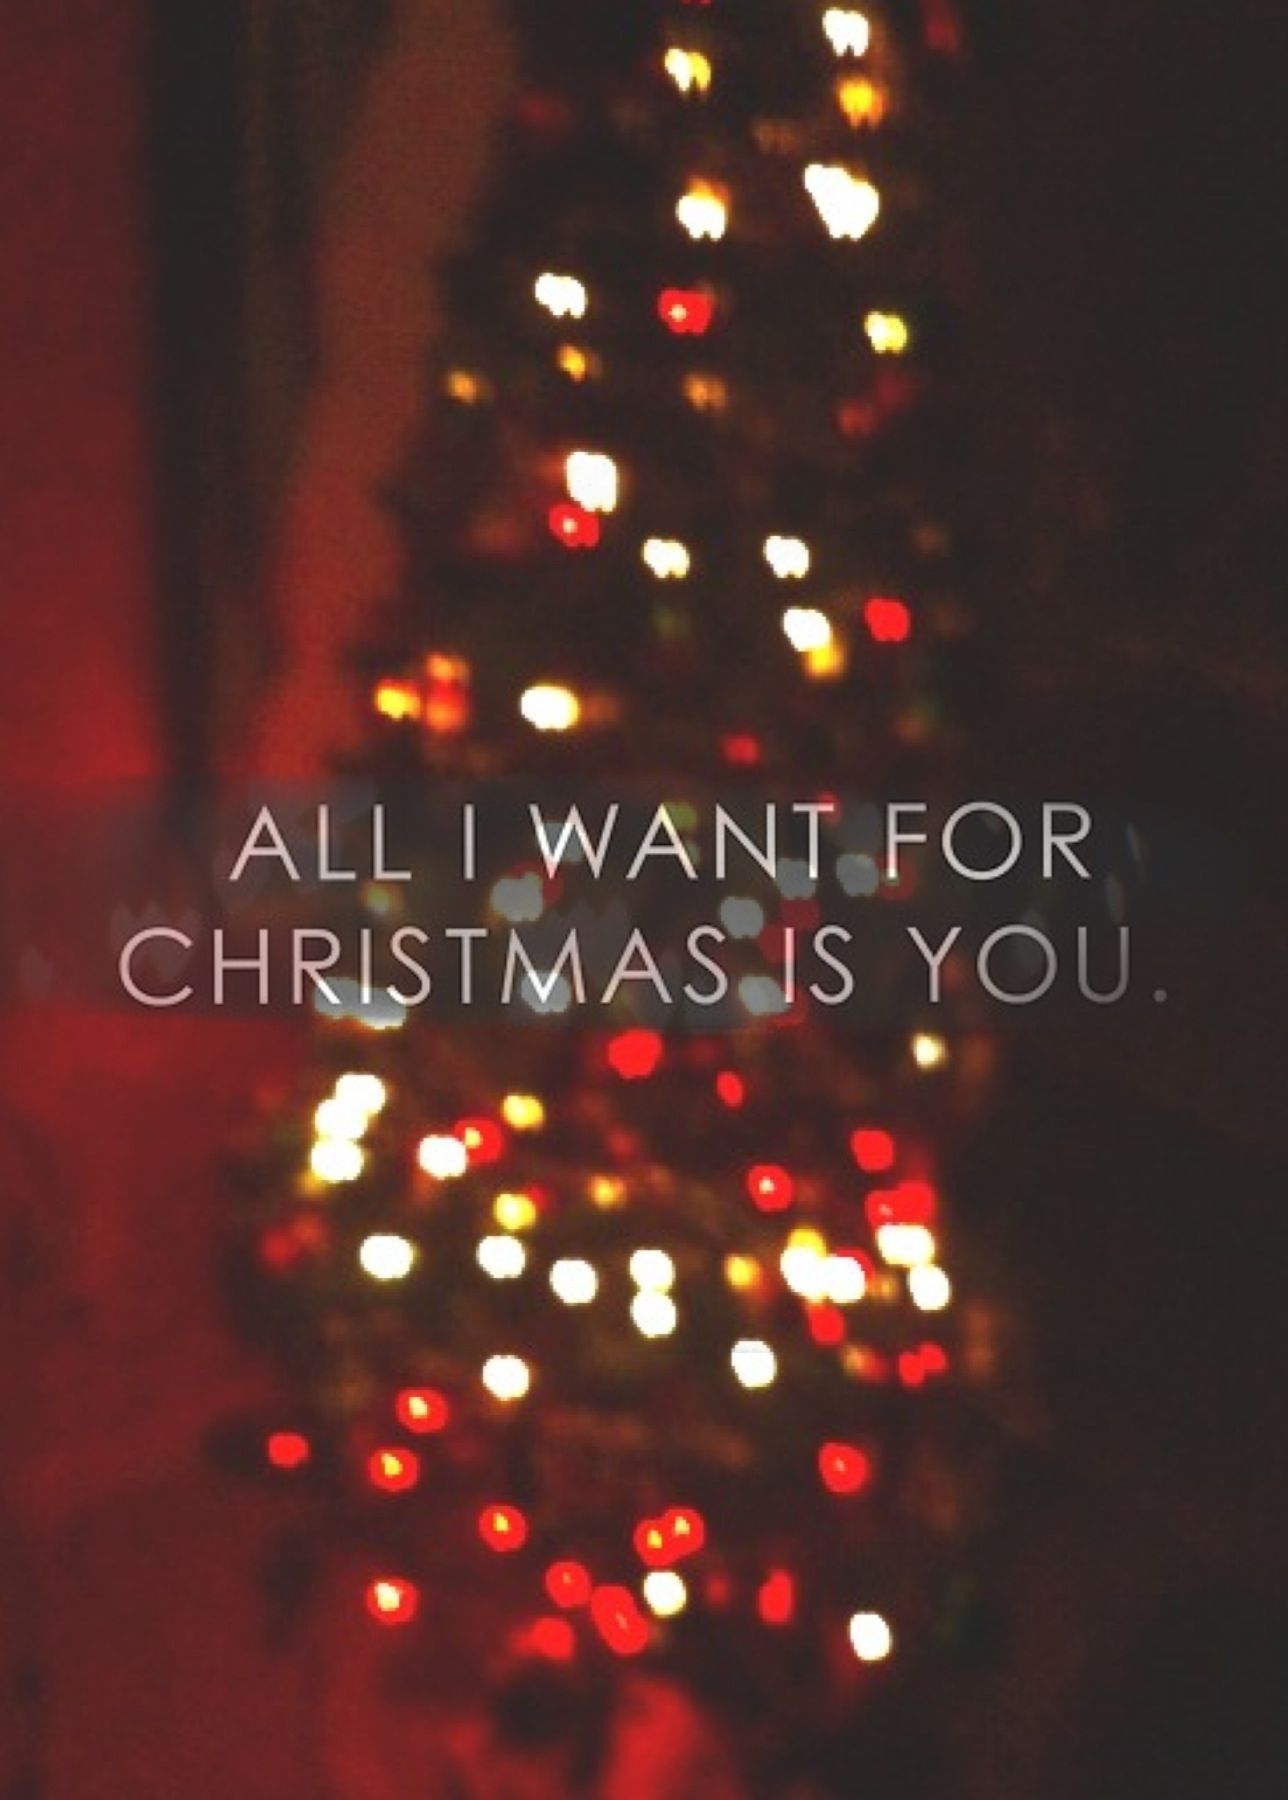 baby all i want for christmas is you ❤. Christmas love quotes, Christmas quotes funny, Good wishes quotes